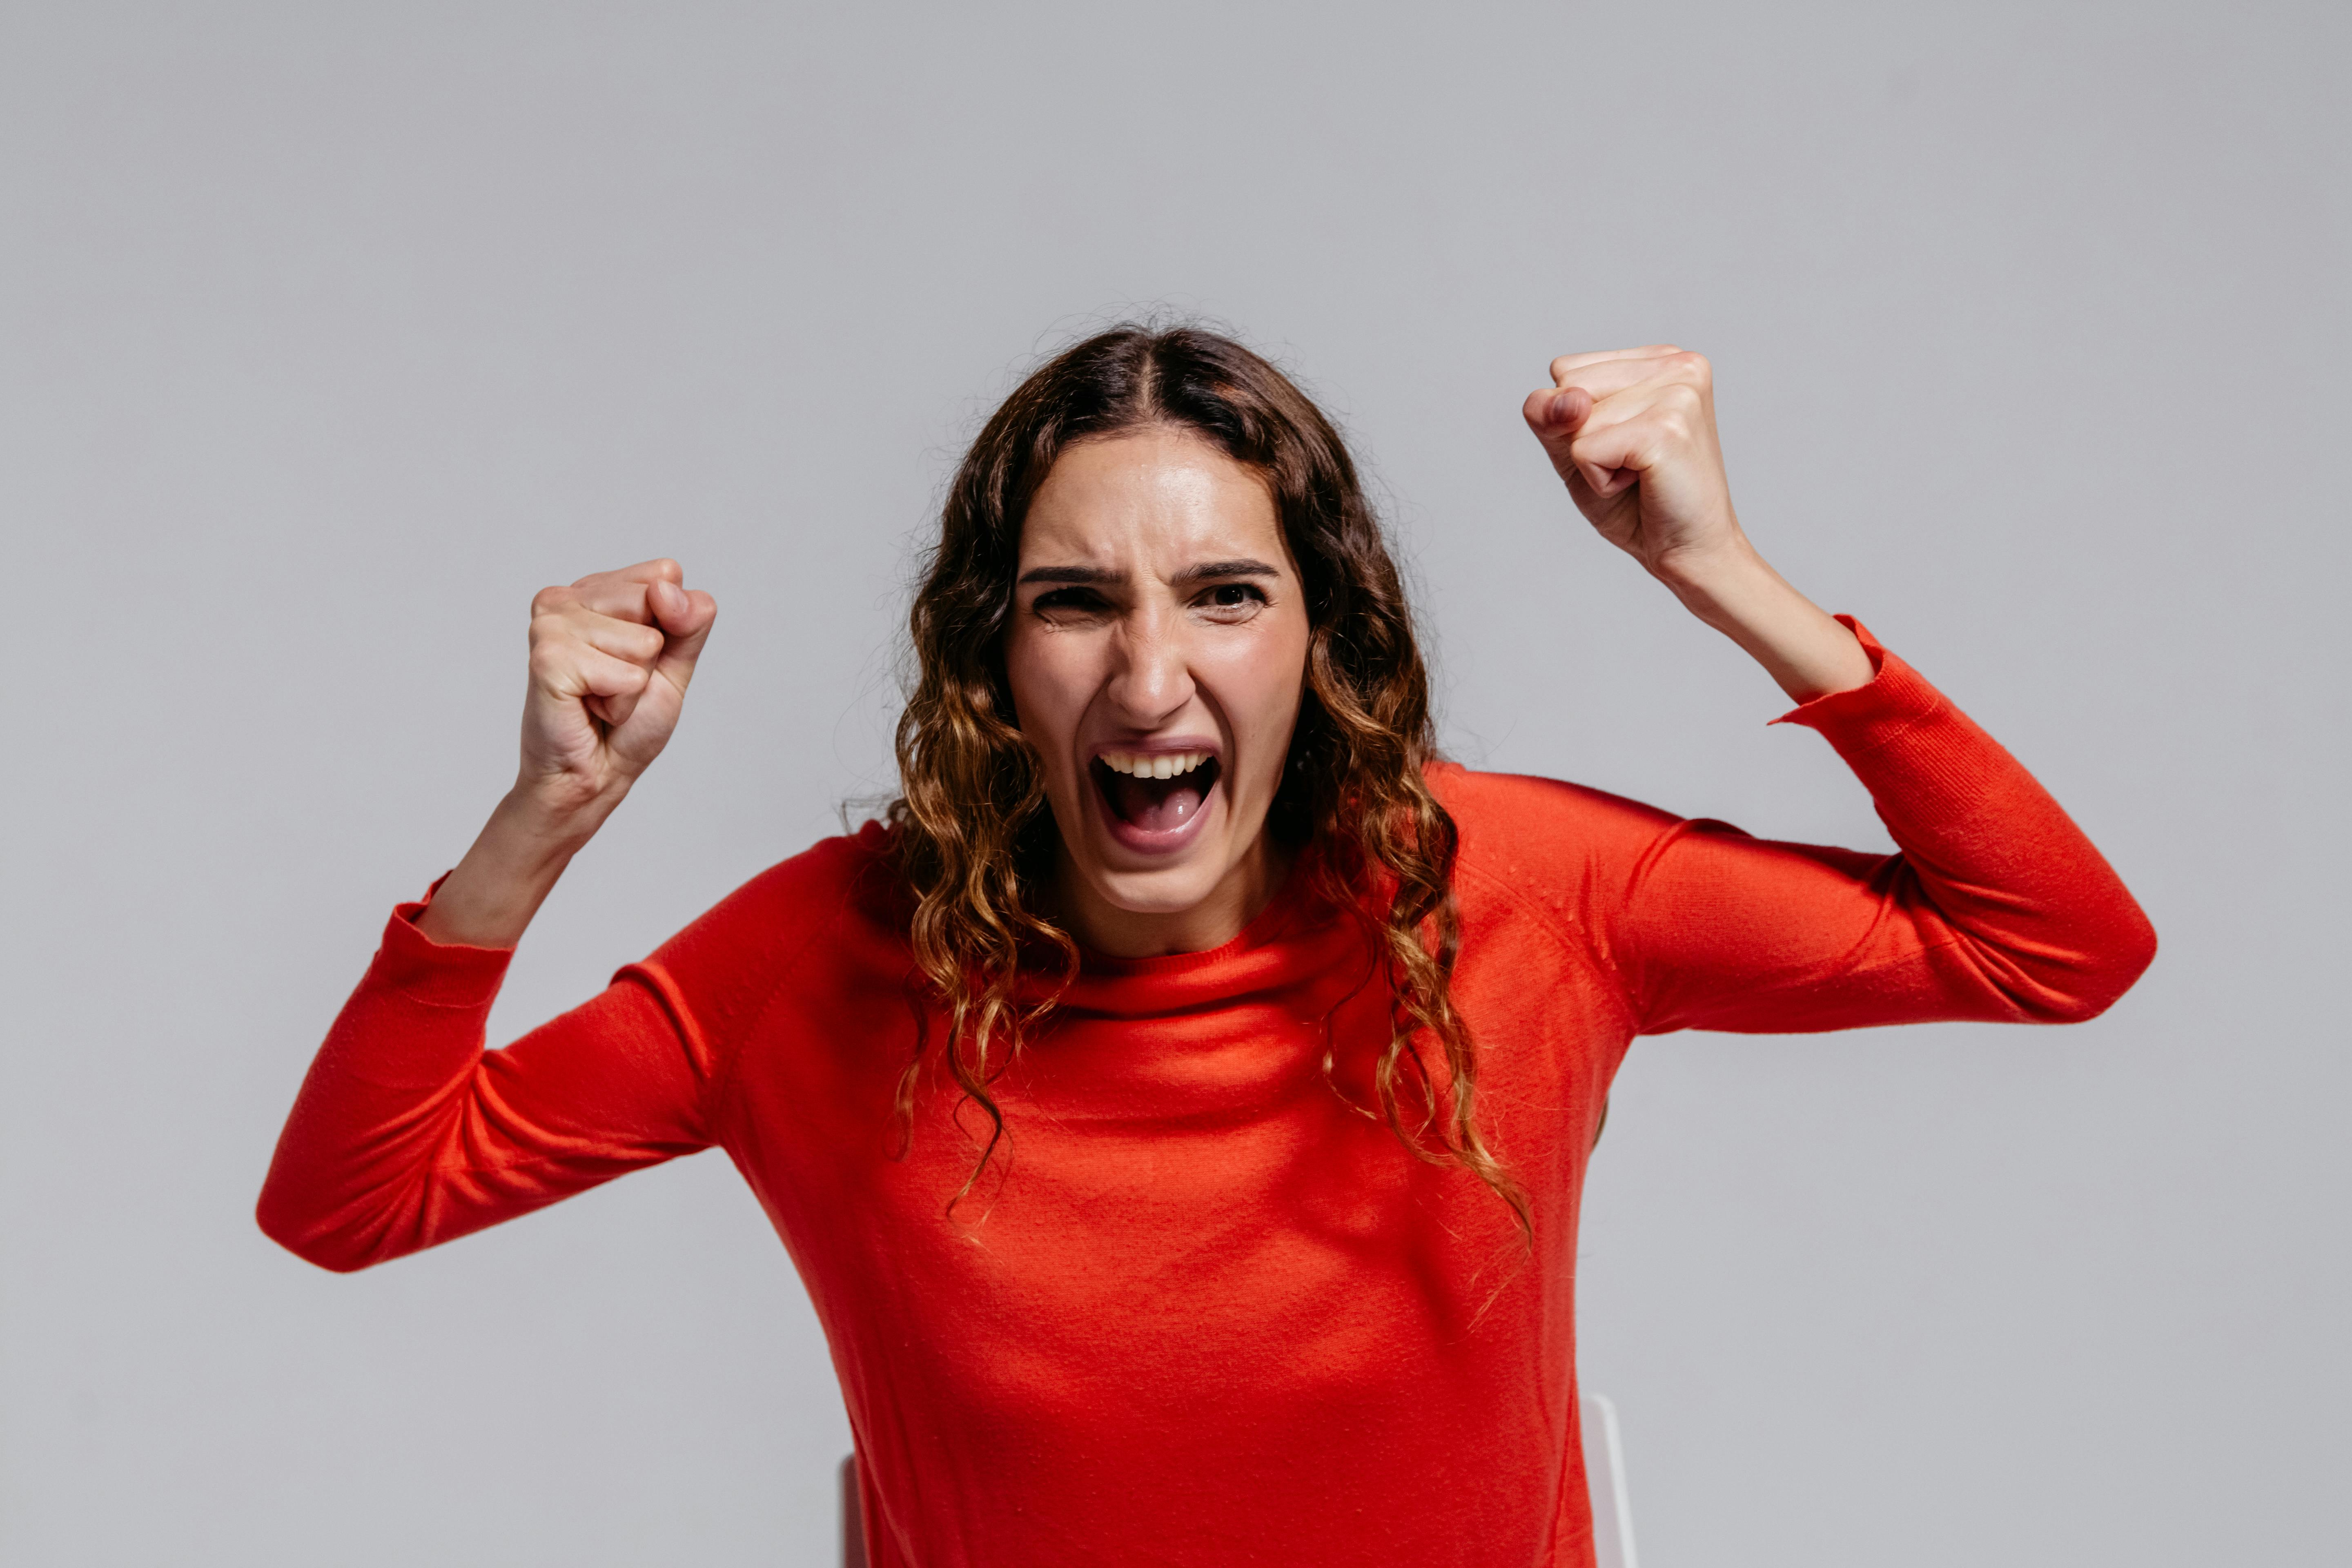 An angry woman shouting while gesturing with her hands | Source: Pexels